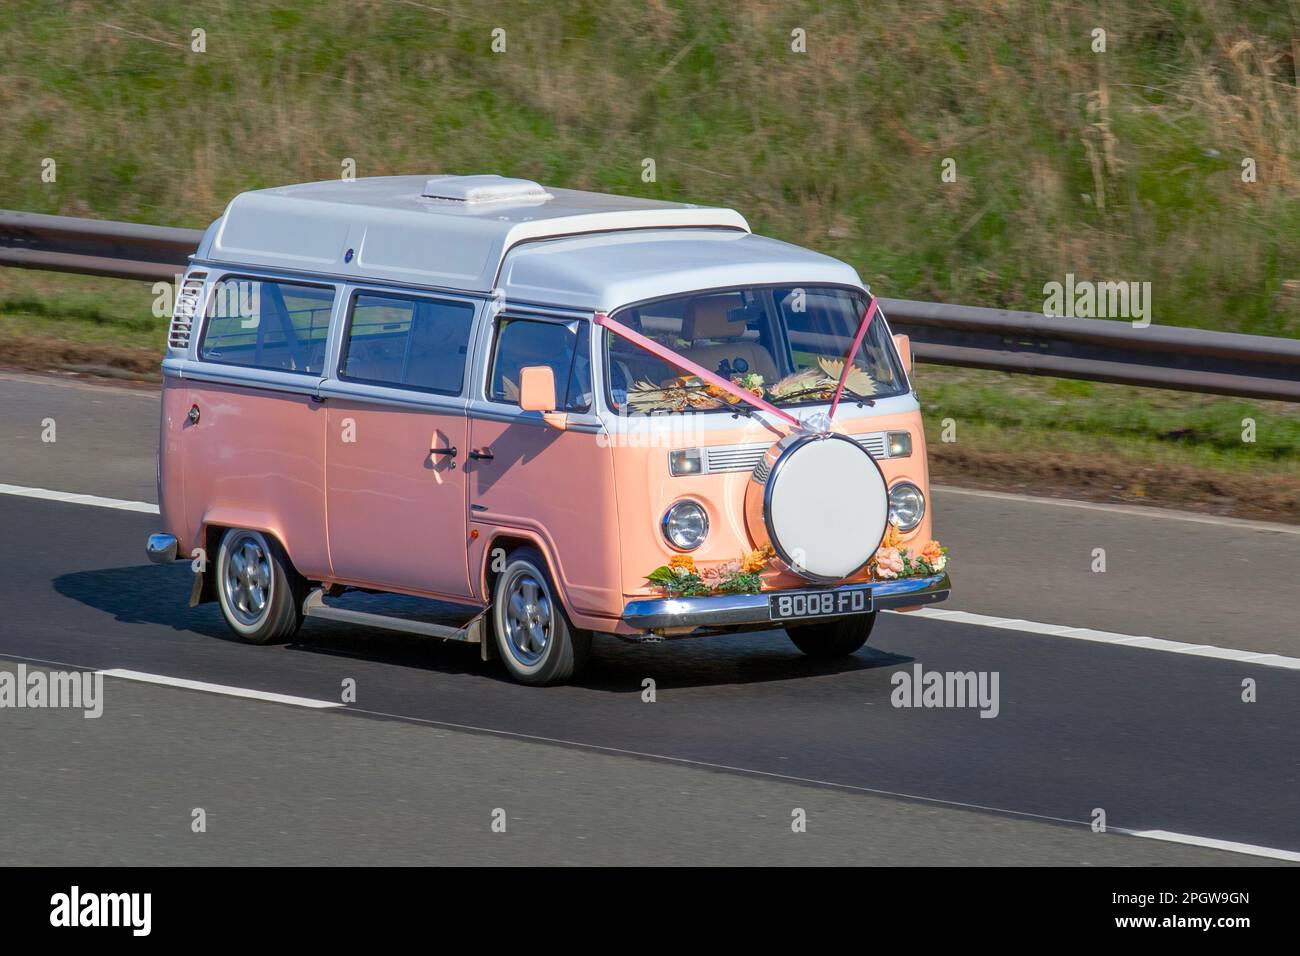 1976 70 seventies Pink VW VOLKSWAGEN 'Flower Power' Delivery Van, conversion Wedding car, with ribbons floral decoration and dashboard flowers; travelling on the M61 motorway UK Stock Photo